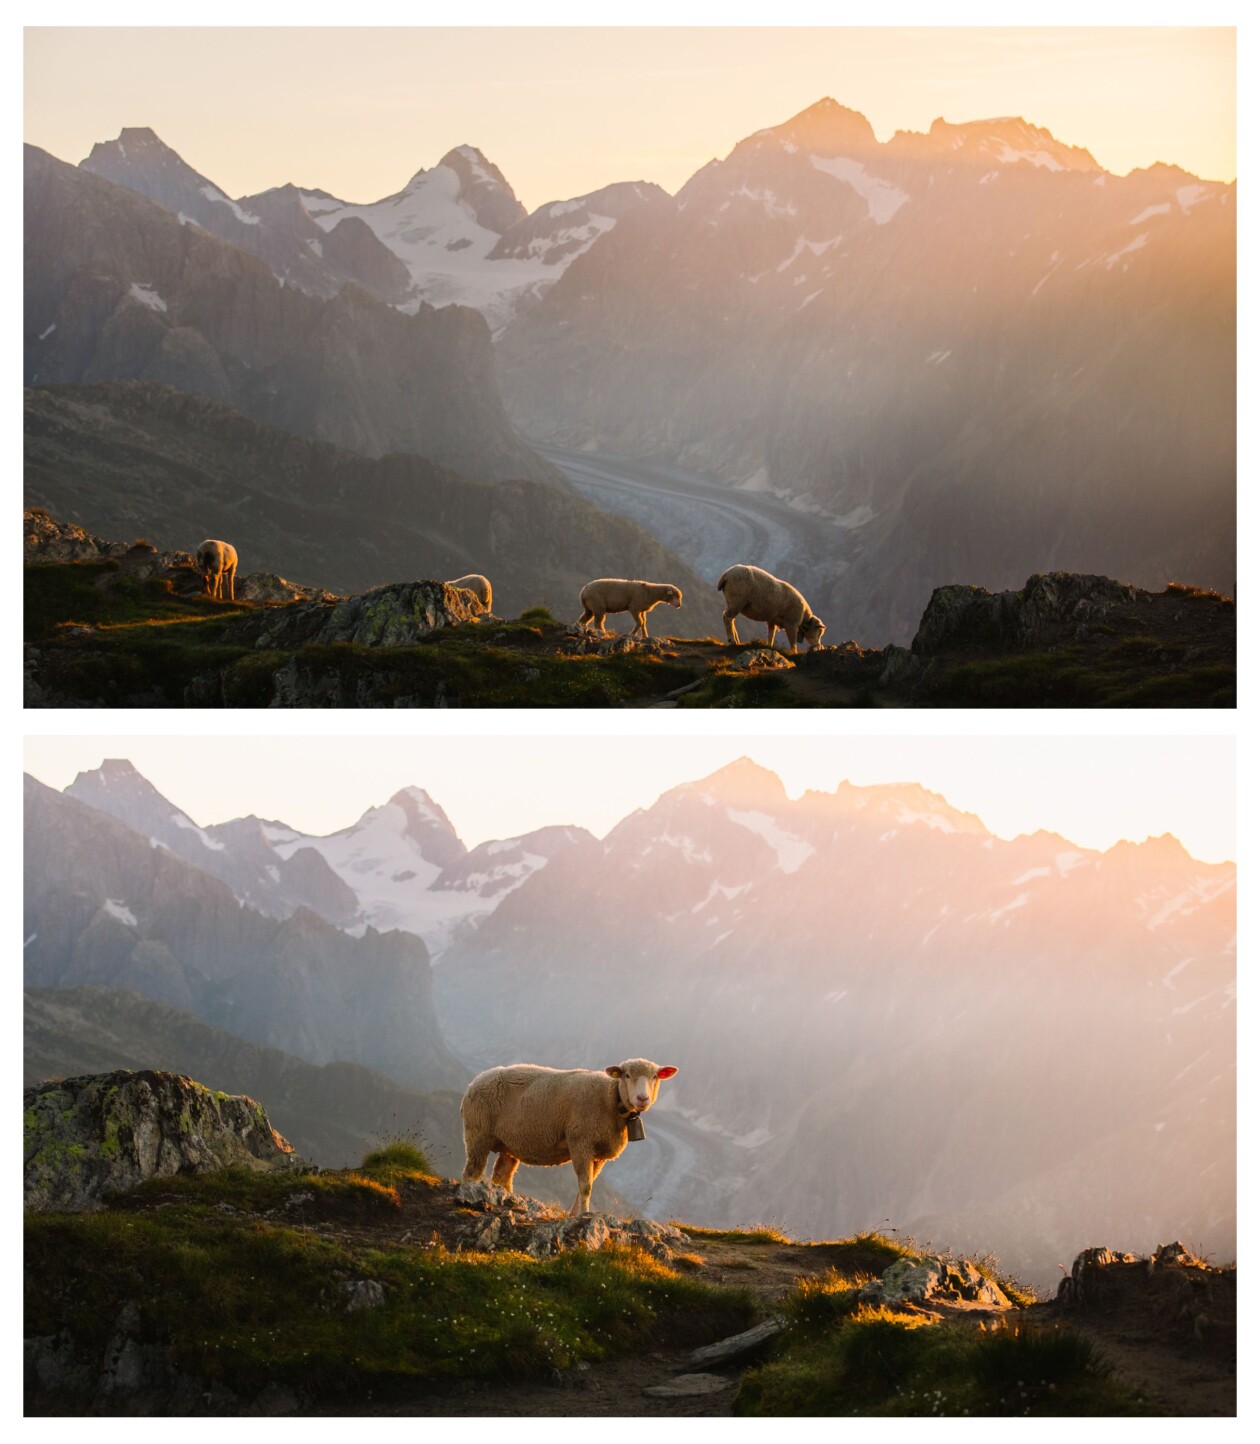 A Lovely Encounter, An Awe Inspiring Photography Series By Ulm, Germany Based Artist Florian Wenzel (7)